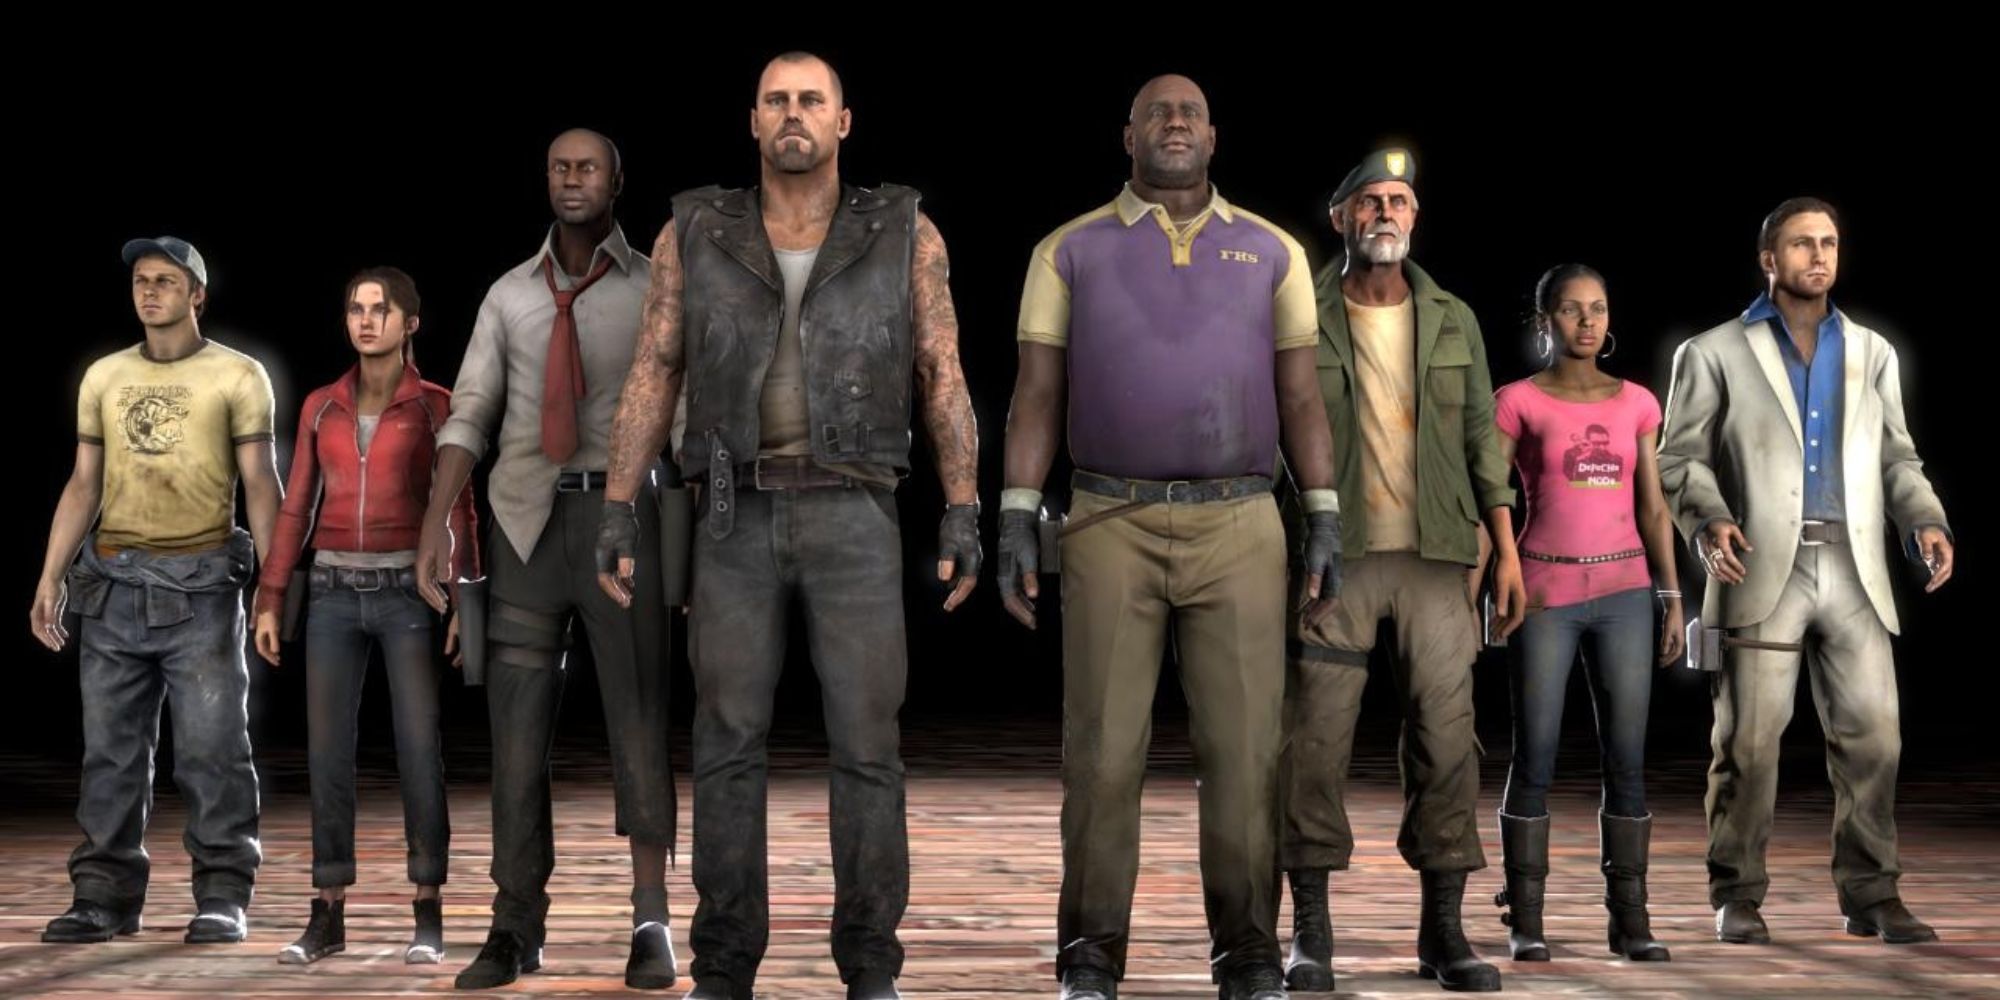 left 4 dead character models stand in a row, l-r: ellis, zoey, louis, francis, coach, bill, rochelle, nick